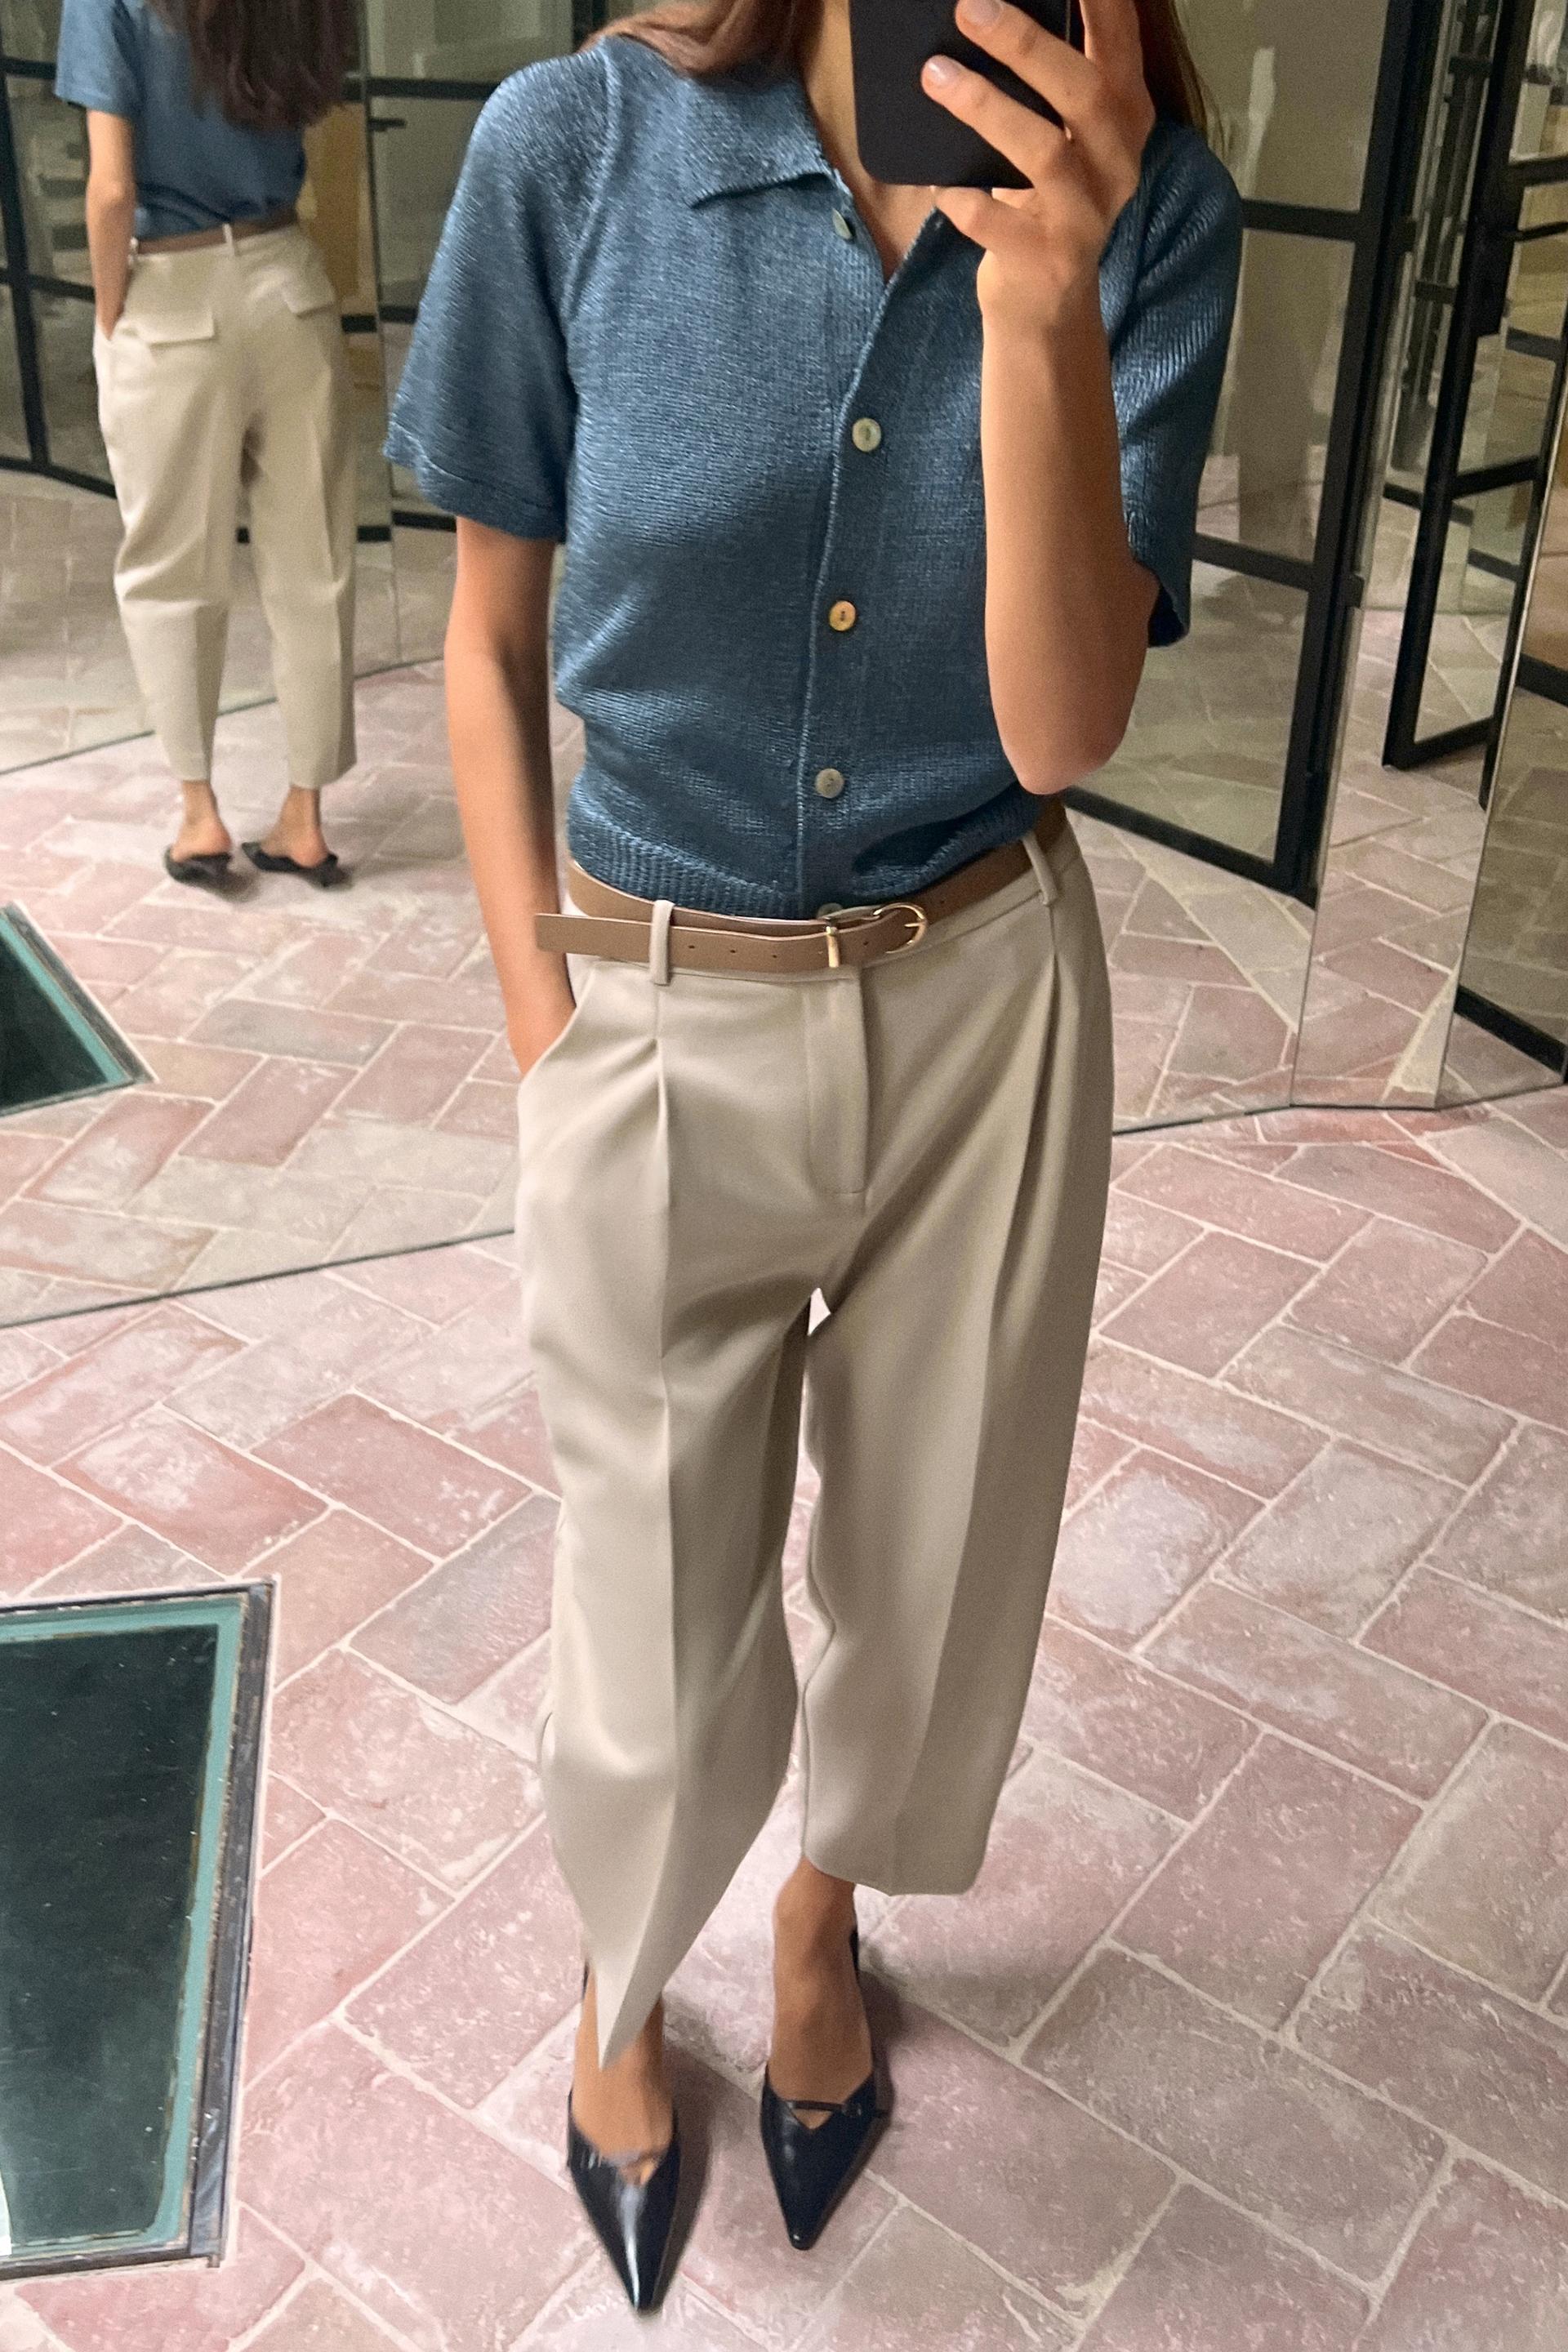 Zara-inspired Belted Trousers